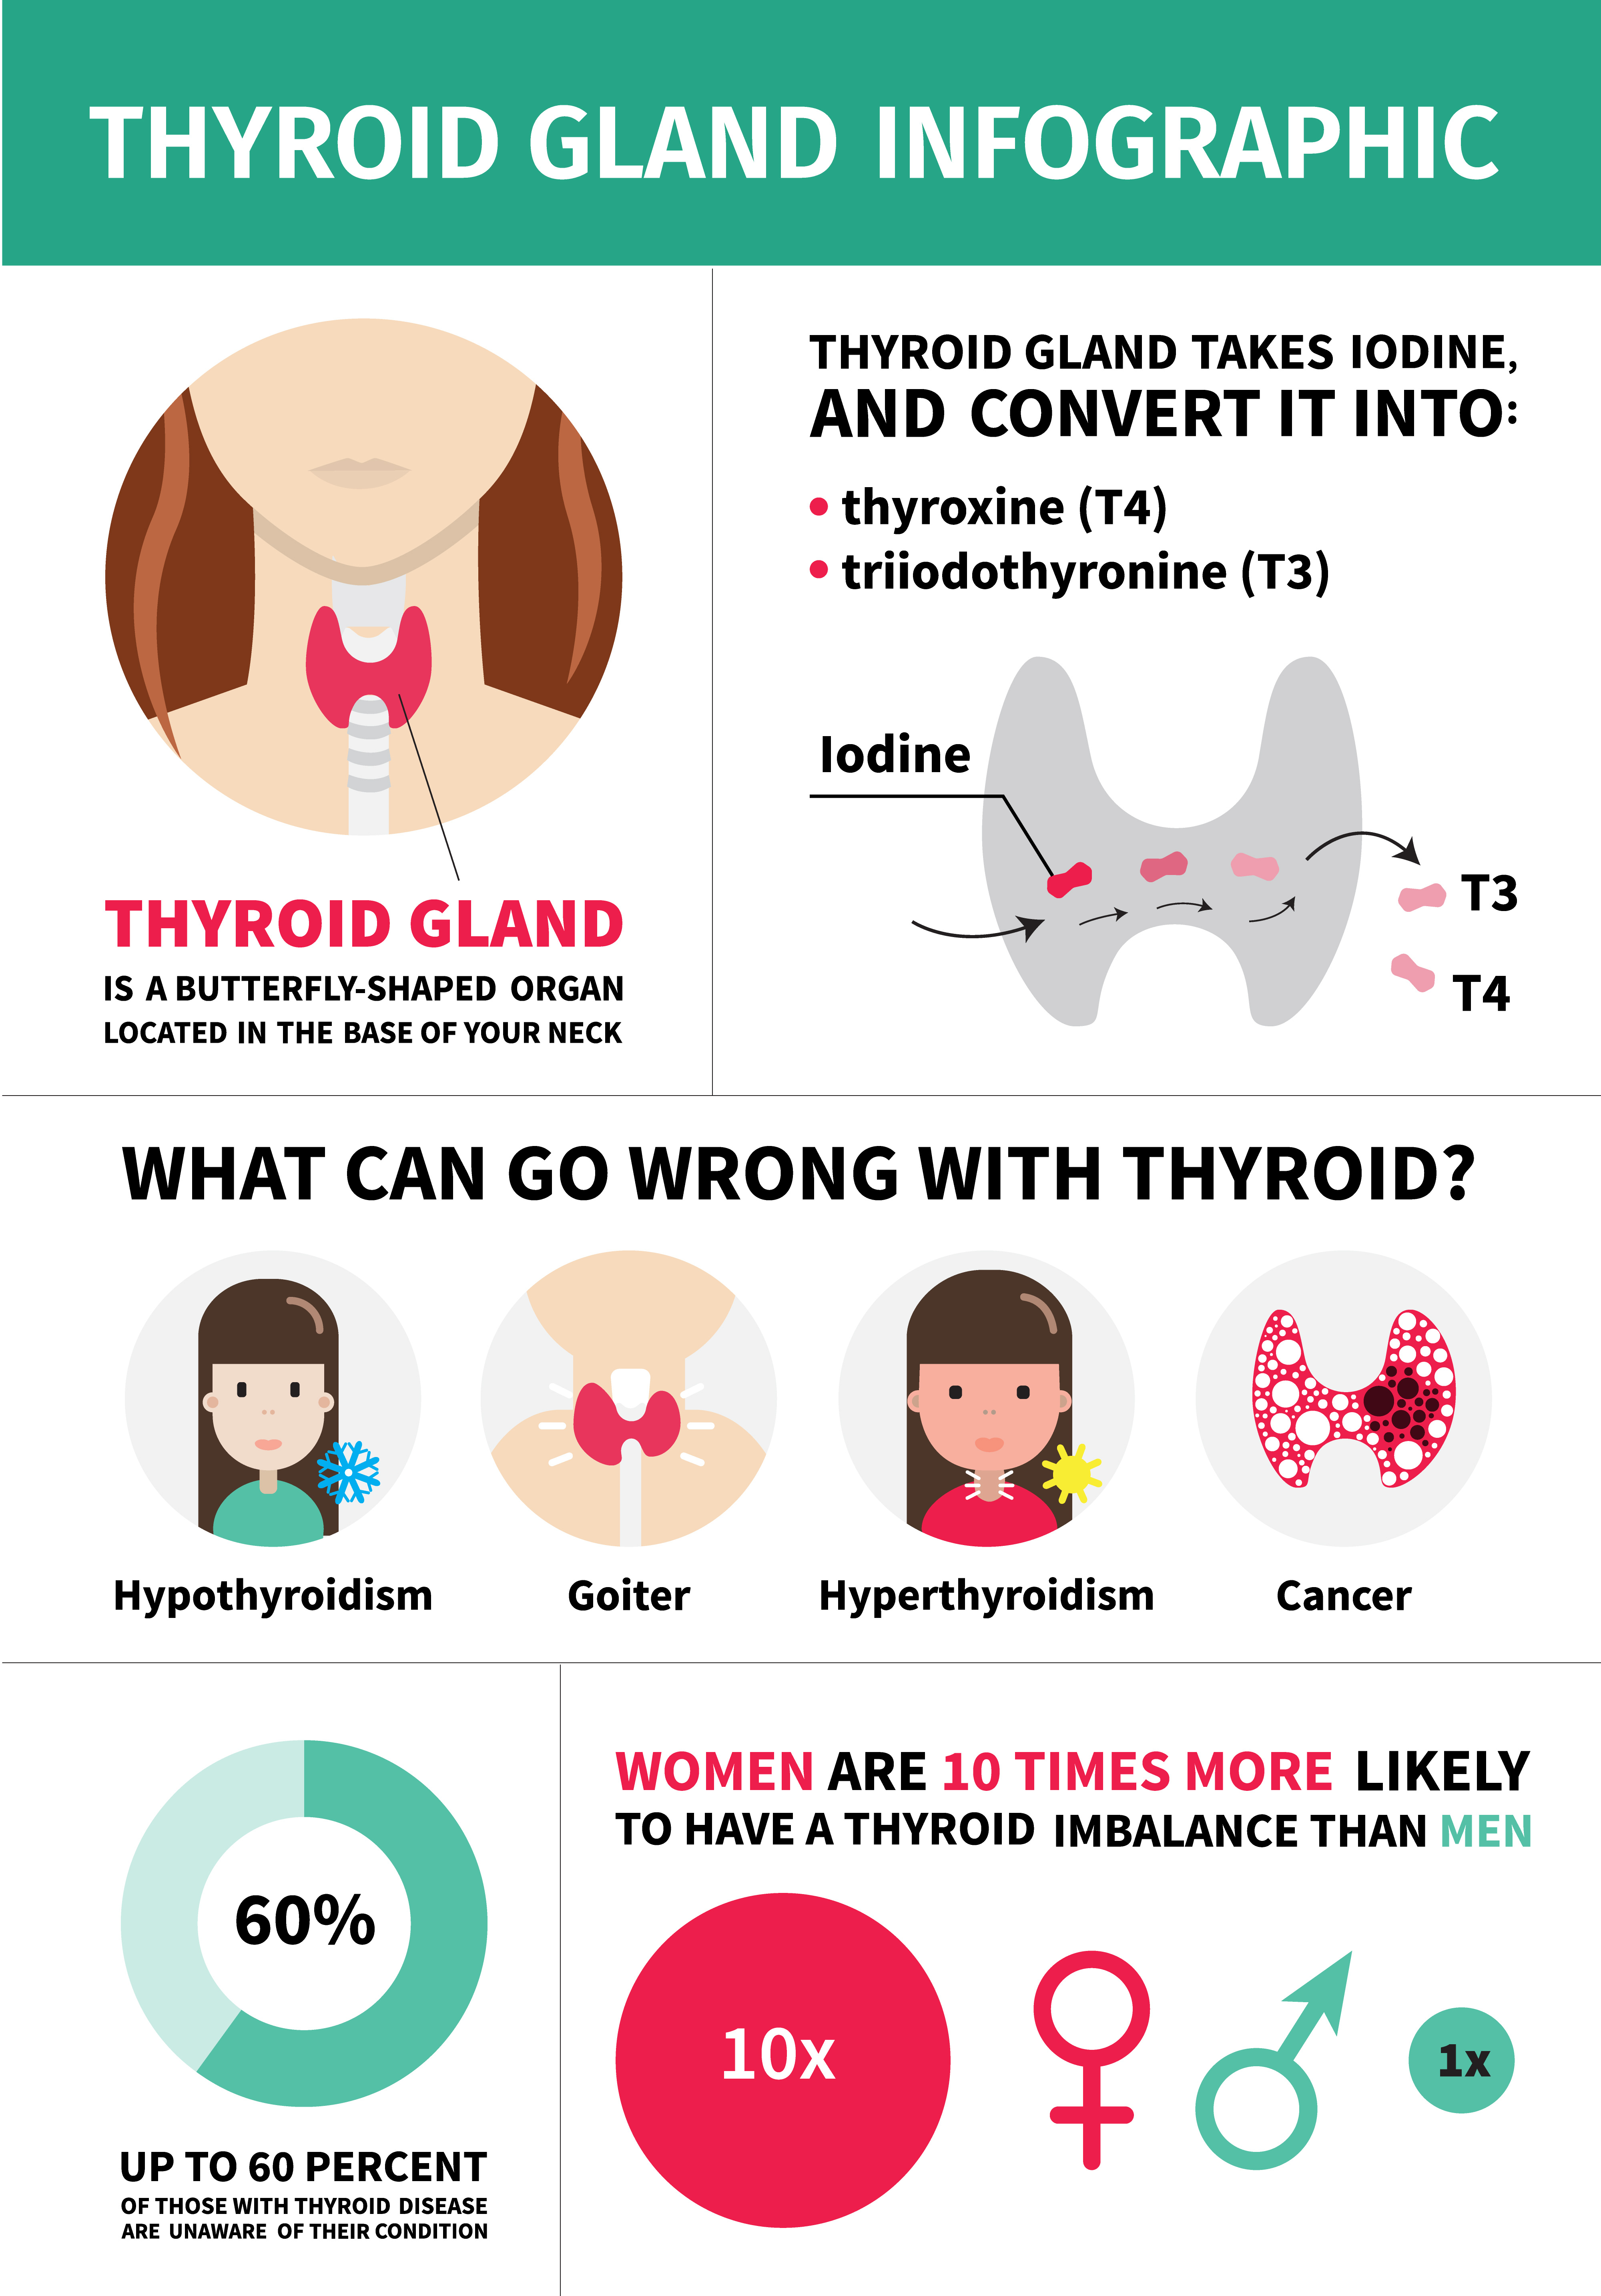 Iodine deficency mainly affects thyroid gland